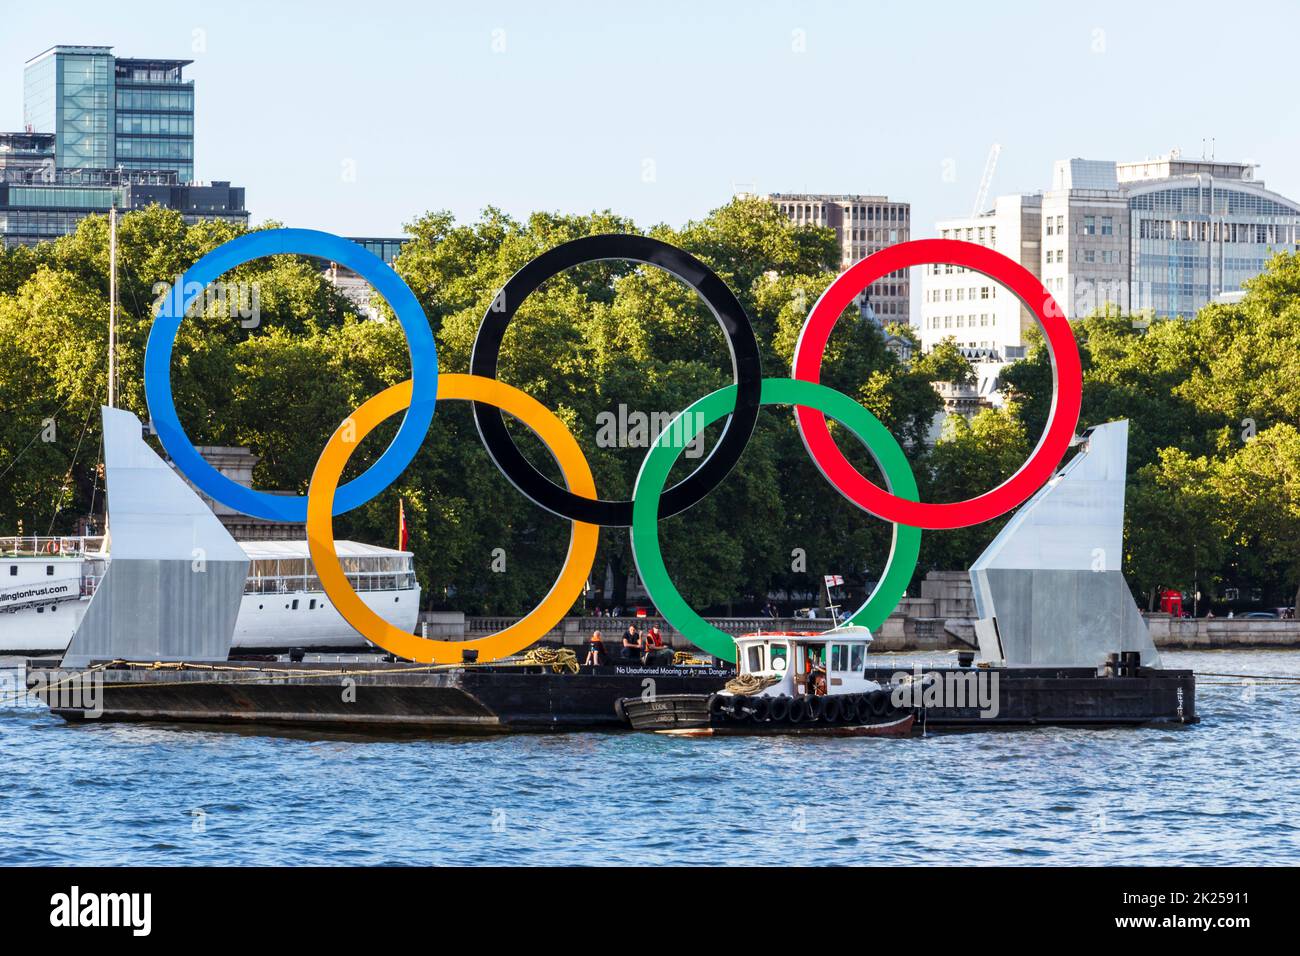 The Olympic rings on a barge on the River Thames, London, UK Stock Photo